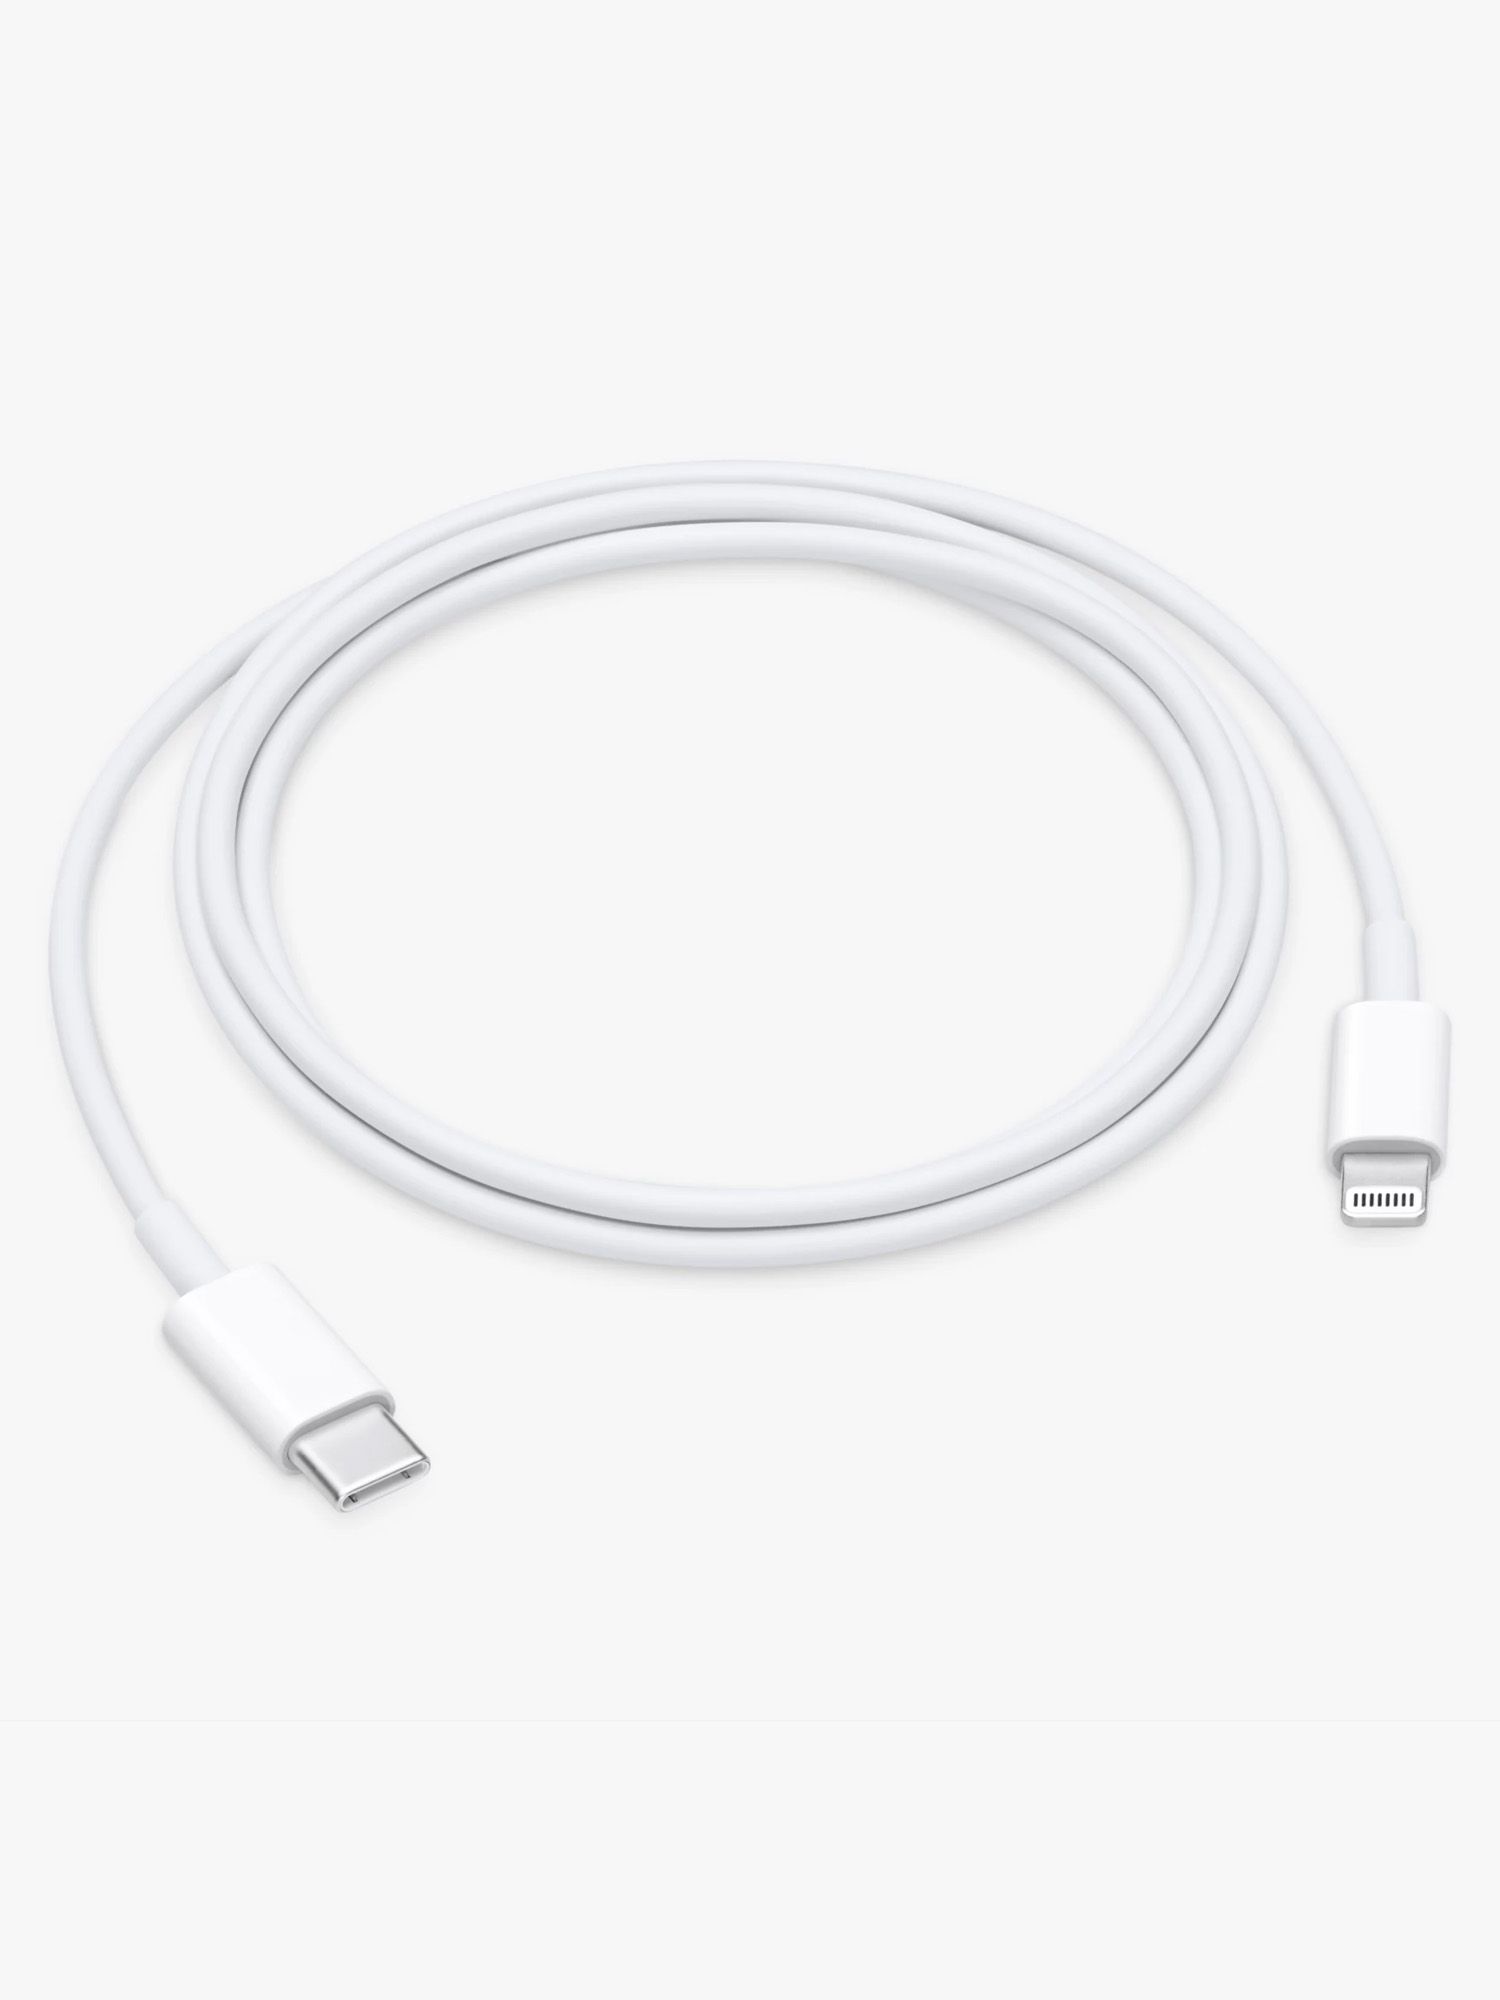 Apple Chargers and Cables